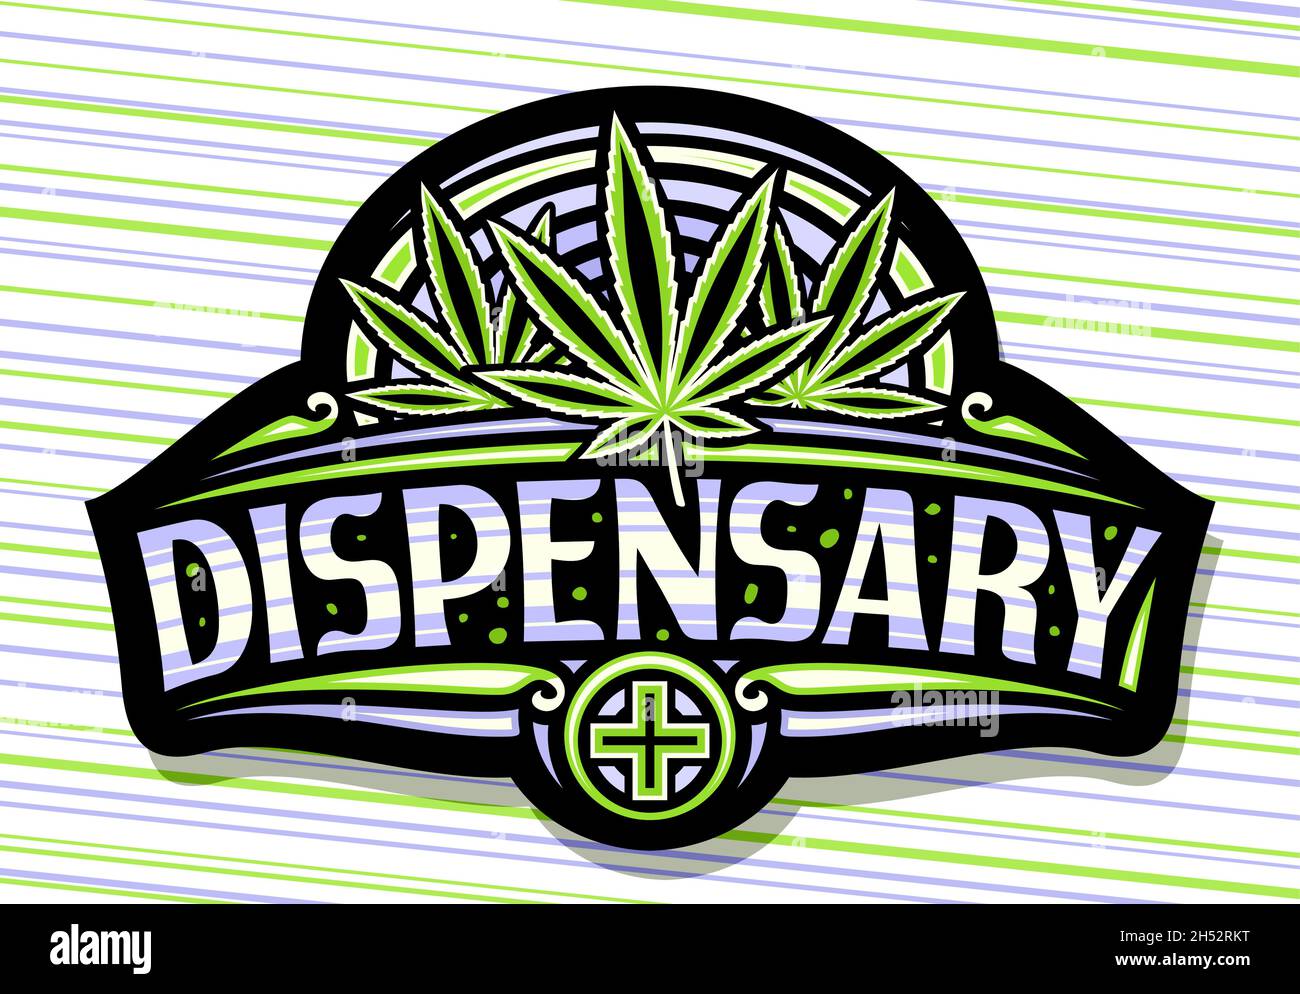 Vector signage for Cannabis Dispensary, dark sign board with illustration of cannabis leaves, decorative flourishes, poster with unique brush letterin Stock Vector